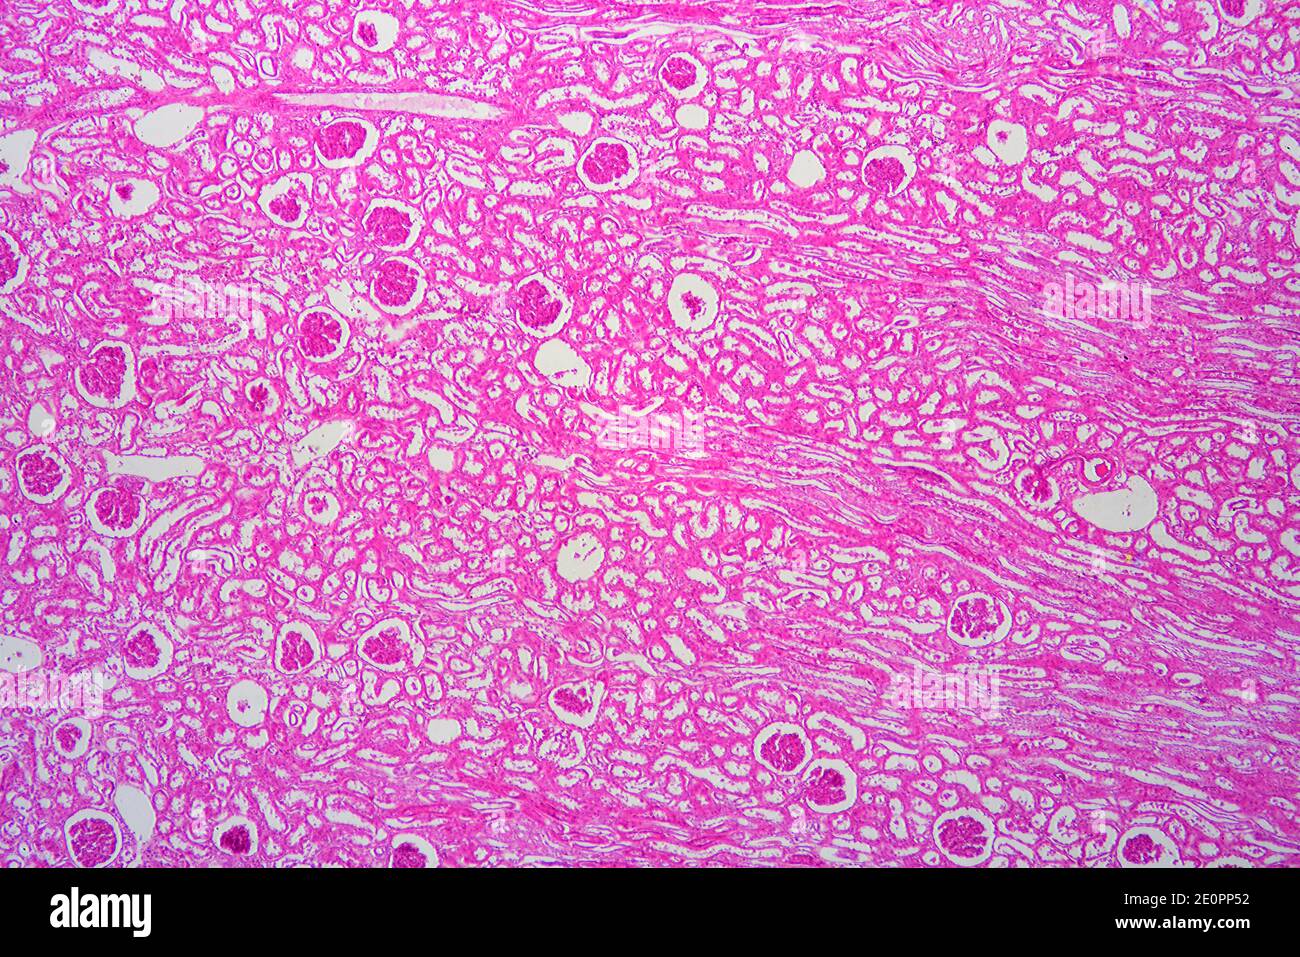 Human kidney section with injected blood showing glomeruli, Malpighian corpuscles and parenchyma. X25 at 10 cm wide. Stock Photo